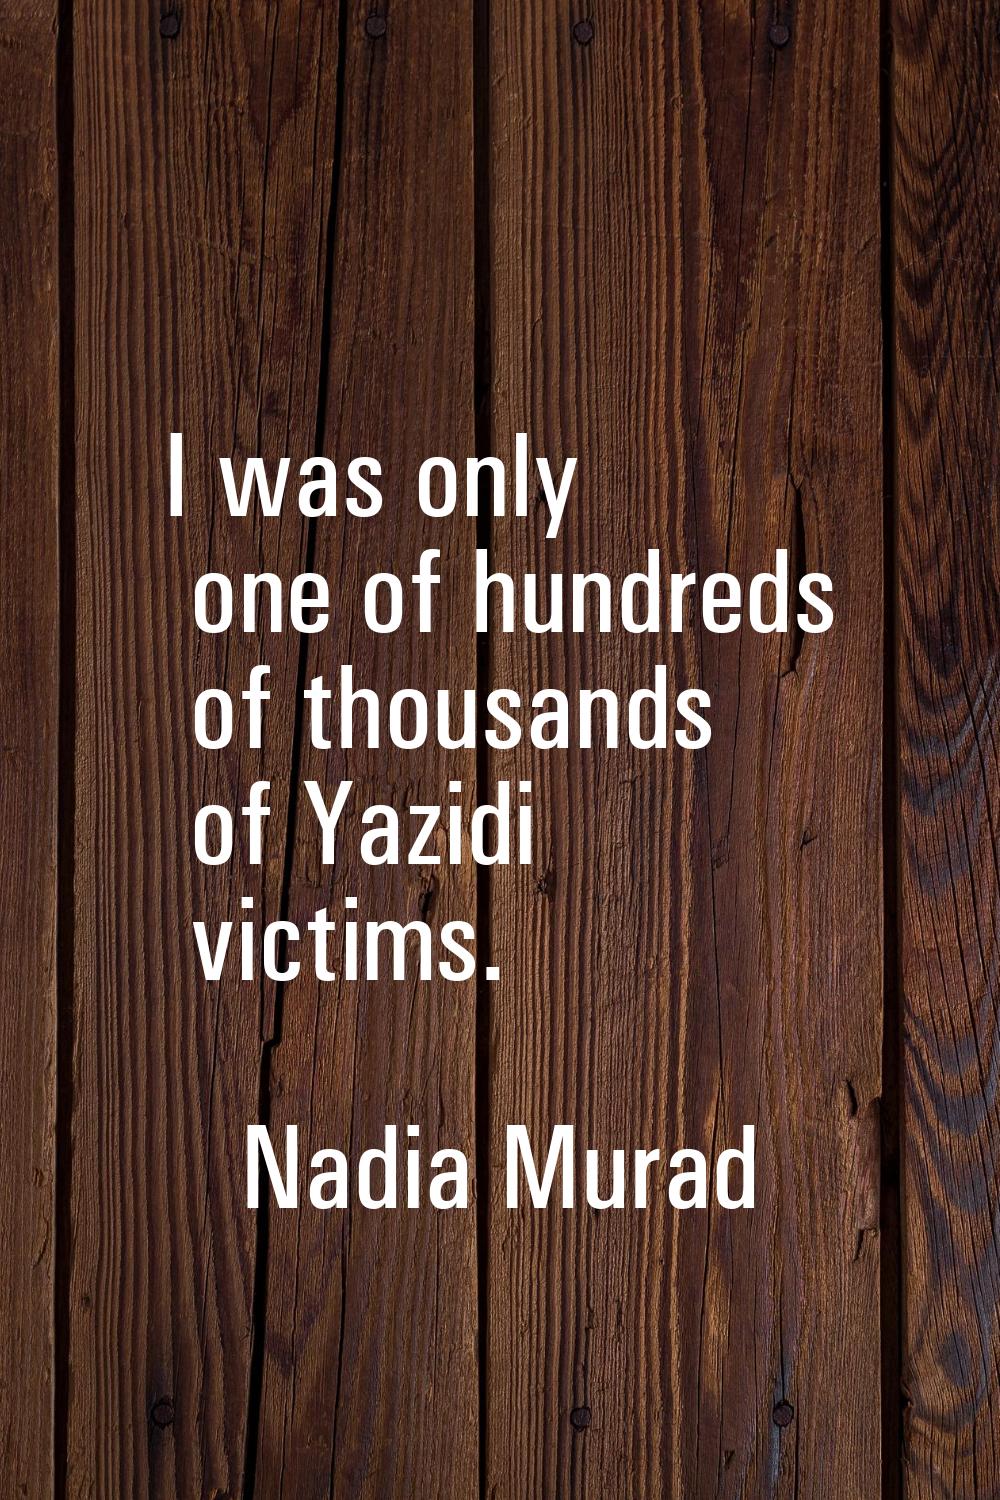 I was only one of hundreds of thousands of Yazidi victims.